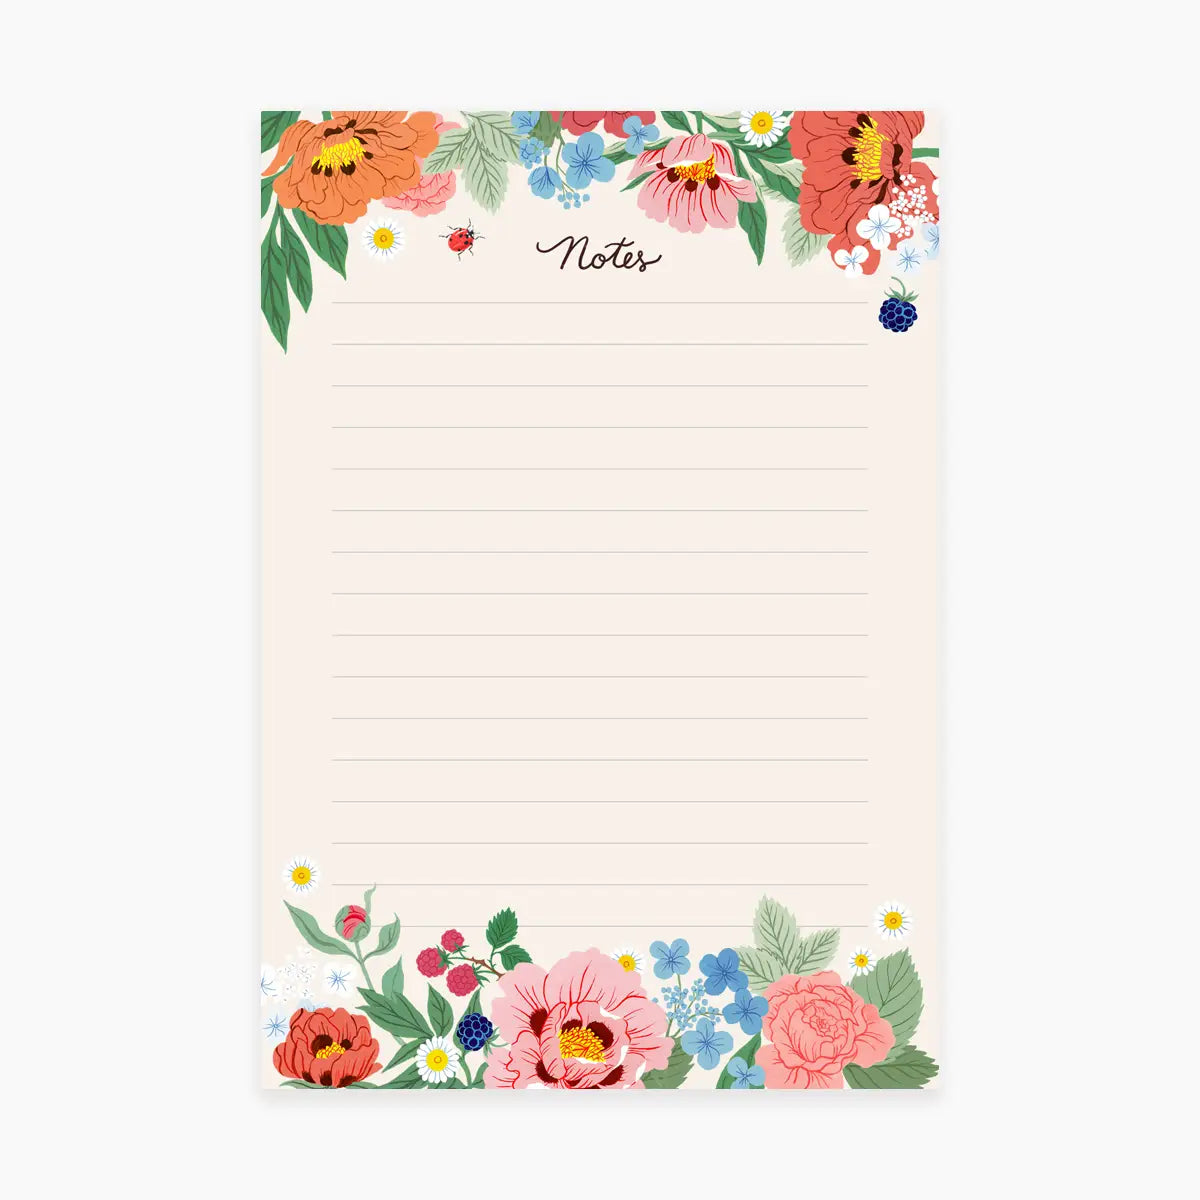 Notepad 'Floral' by Botanica Paper co.